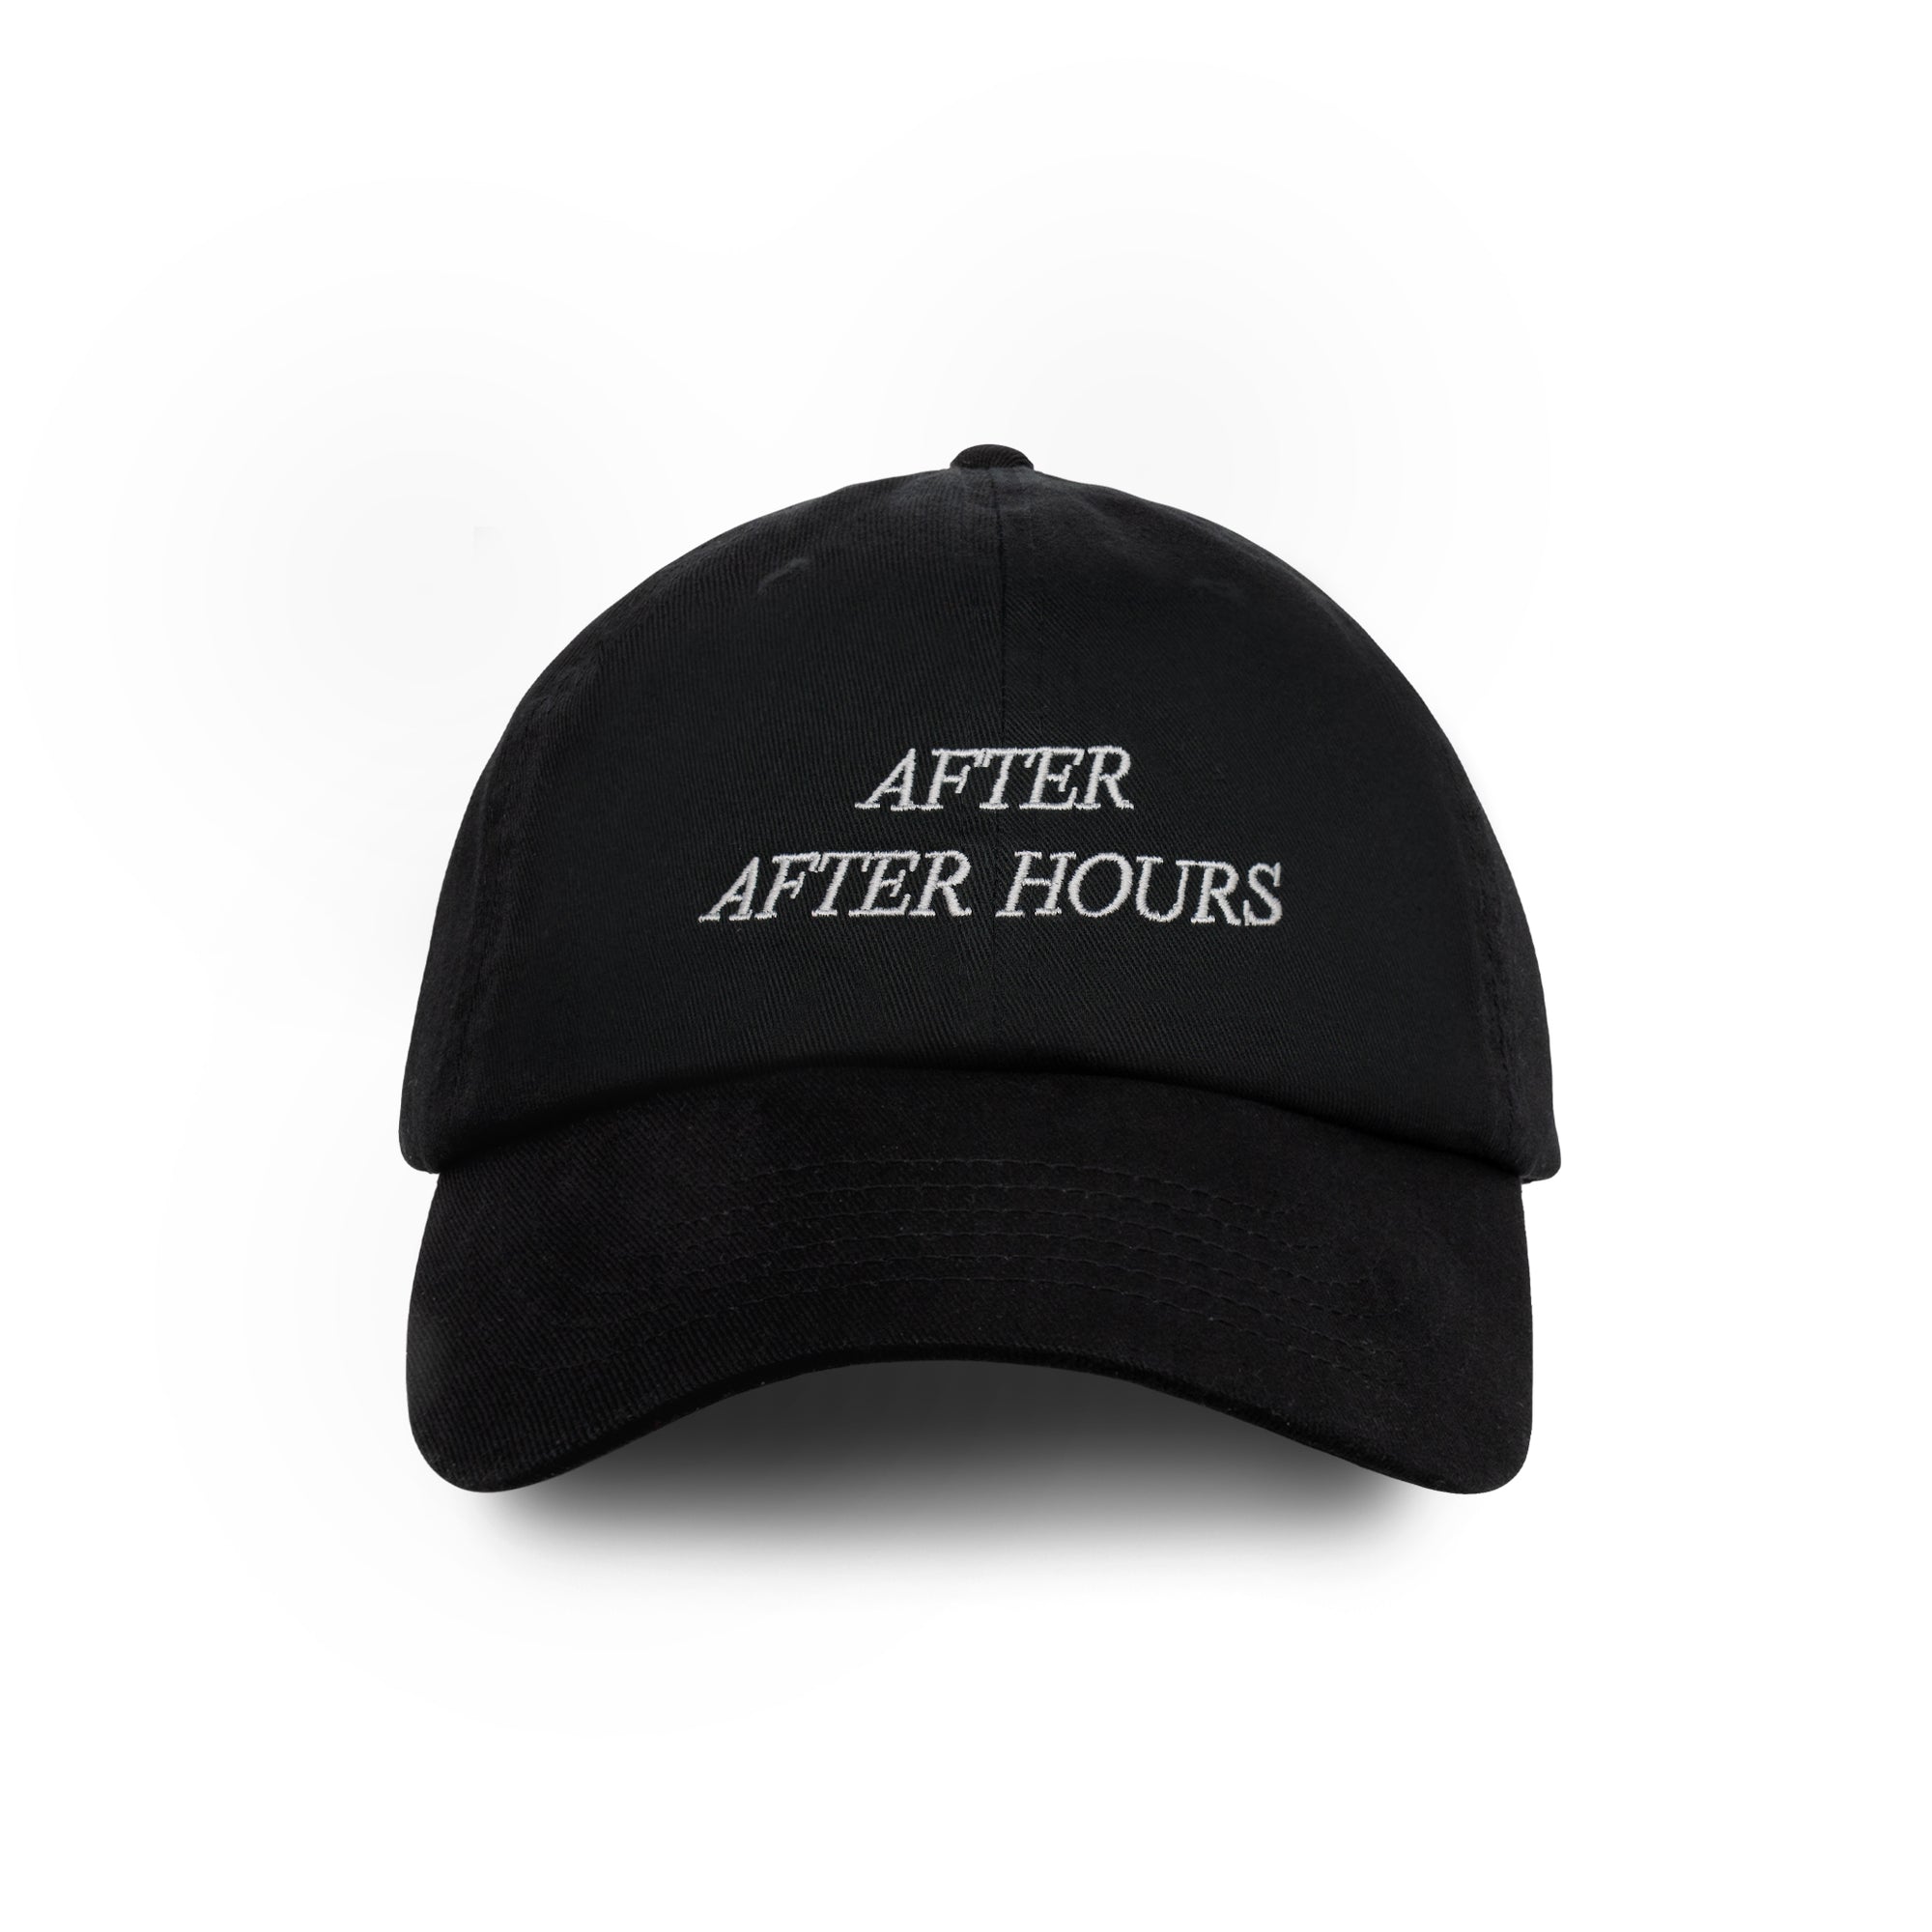 AFTER AFTER HOURS